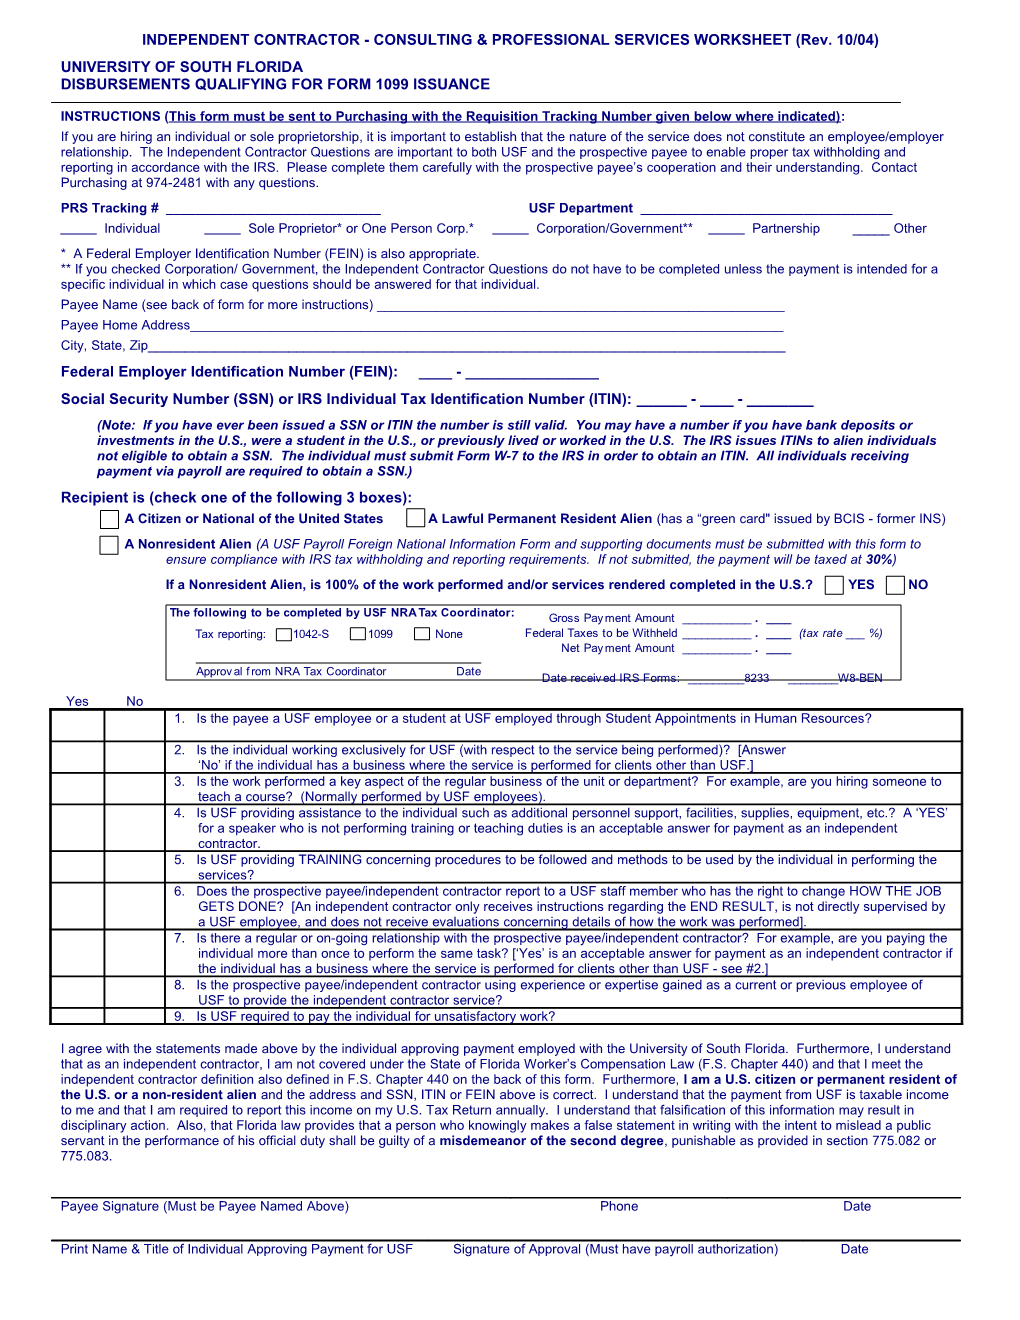 Consulting & Professional Services Worksheet